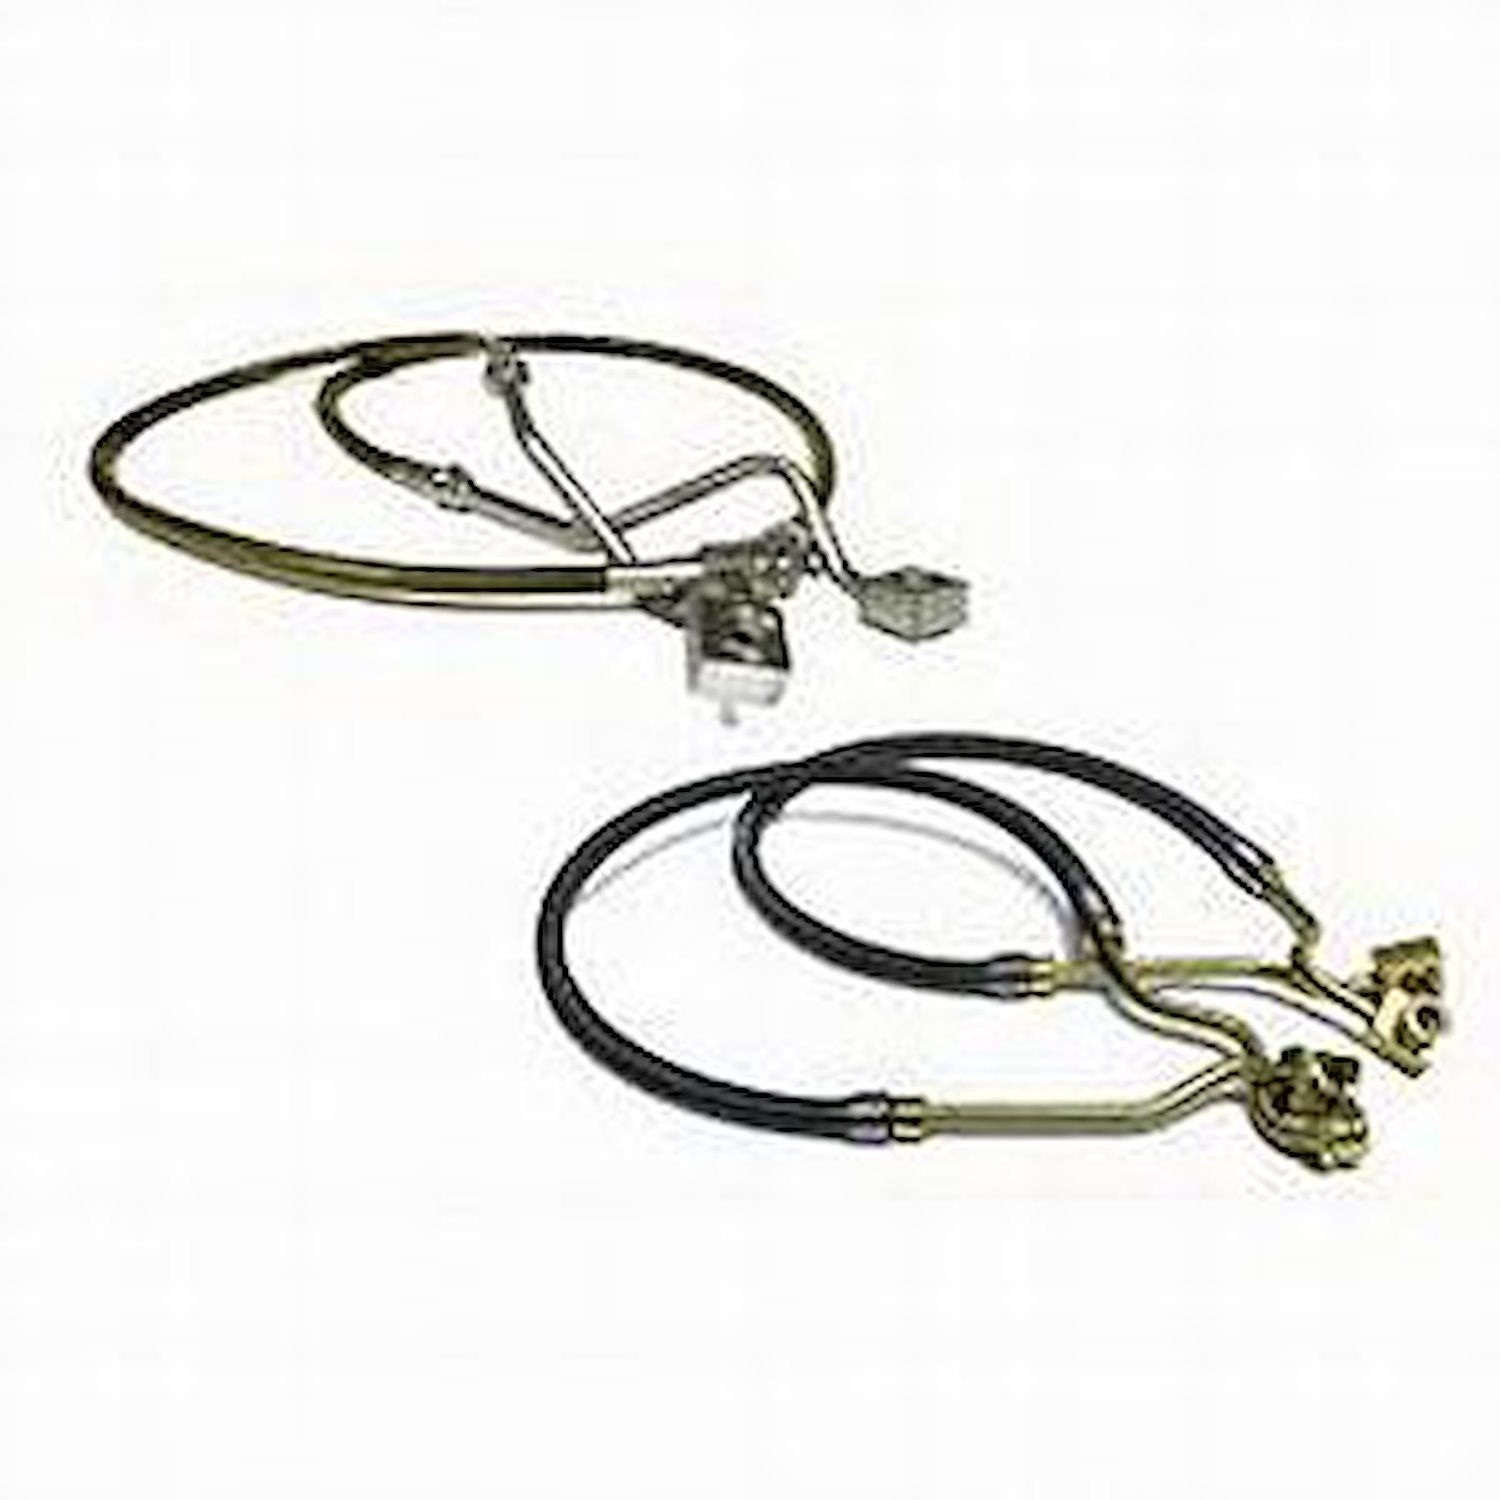 Bullet Proof Kevlar  Brake Hose Front Reinforced Braided Stainless Steel Length Over Stock 3 in. Vehicles w/4-7 in. Lift